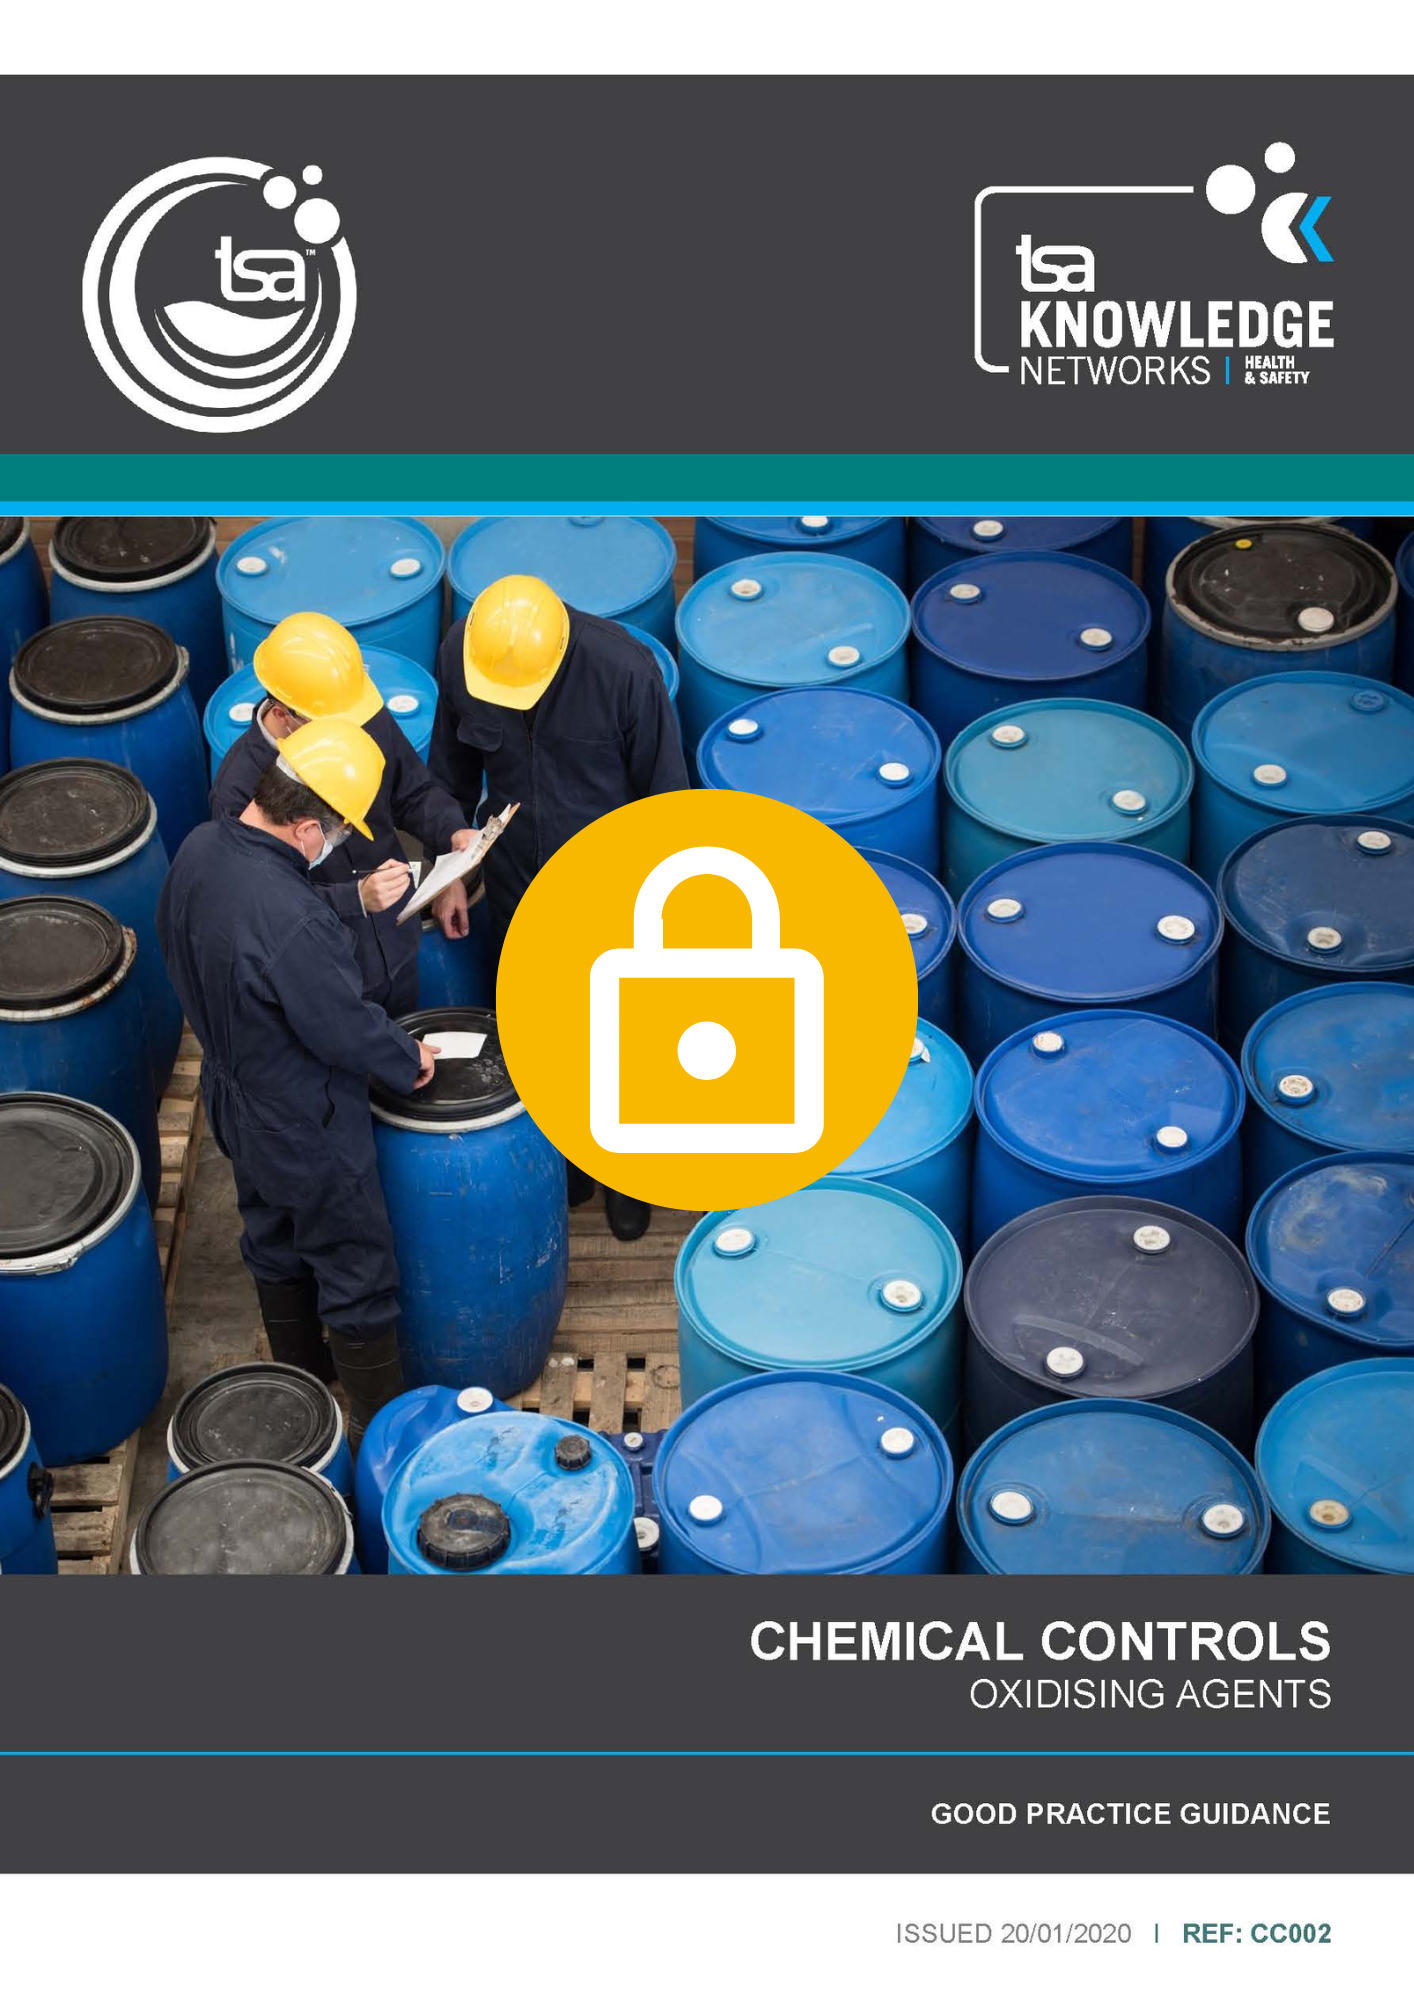 Fire Safety: Oxidising Agents - Chemical Controls